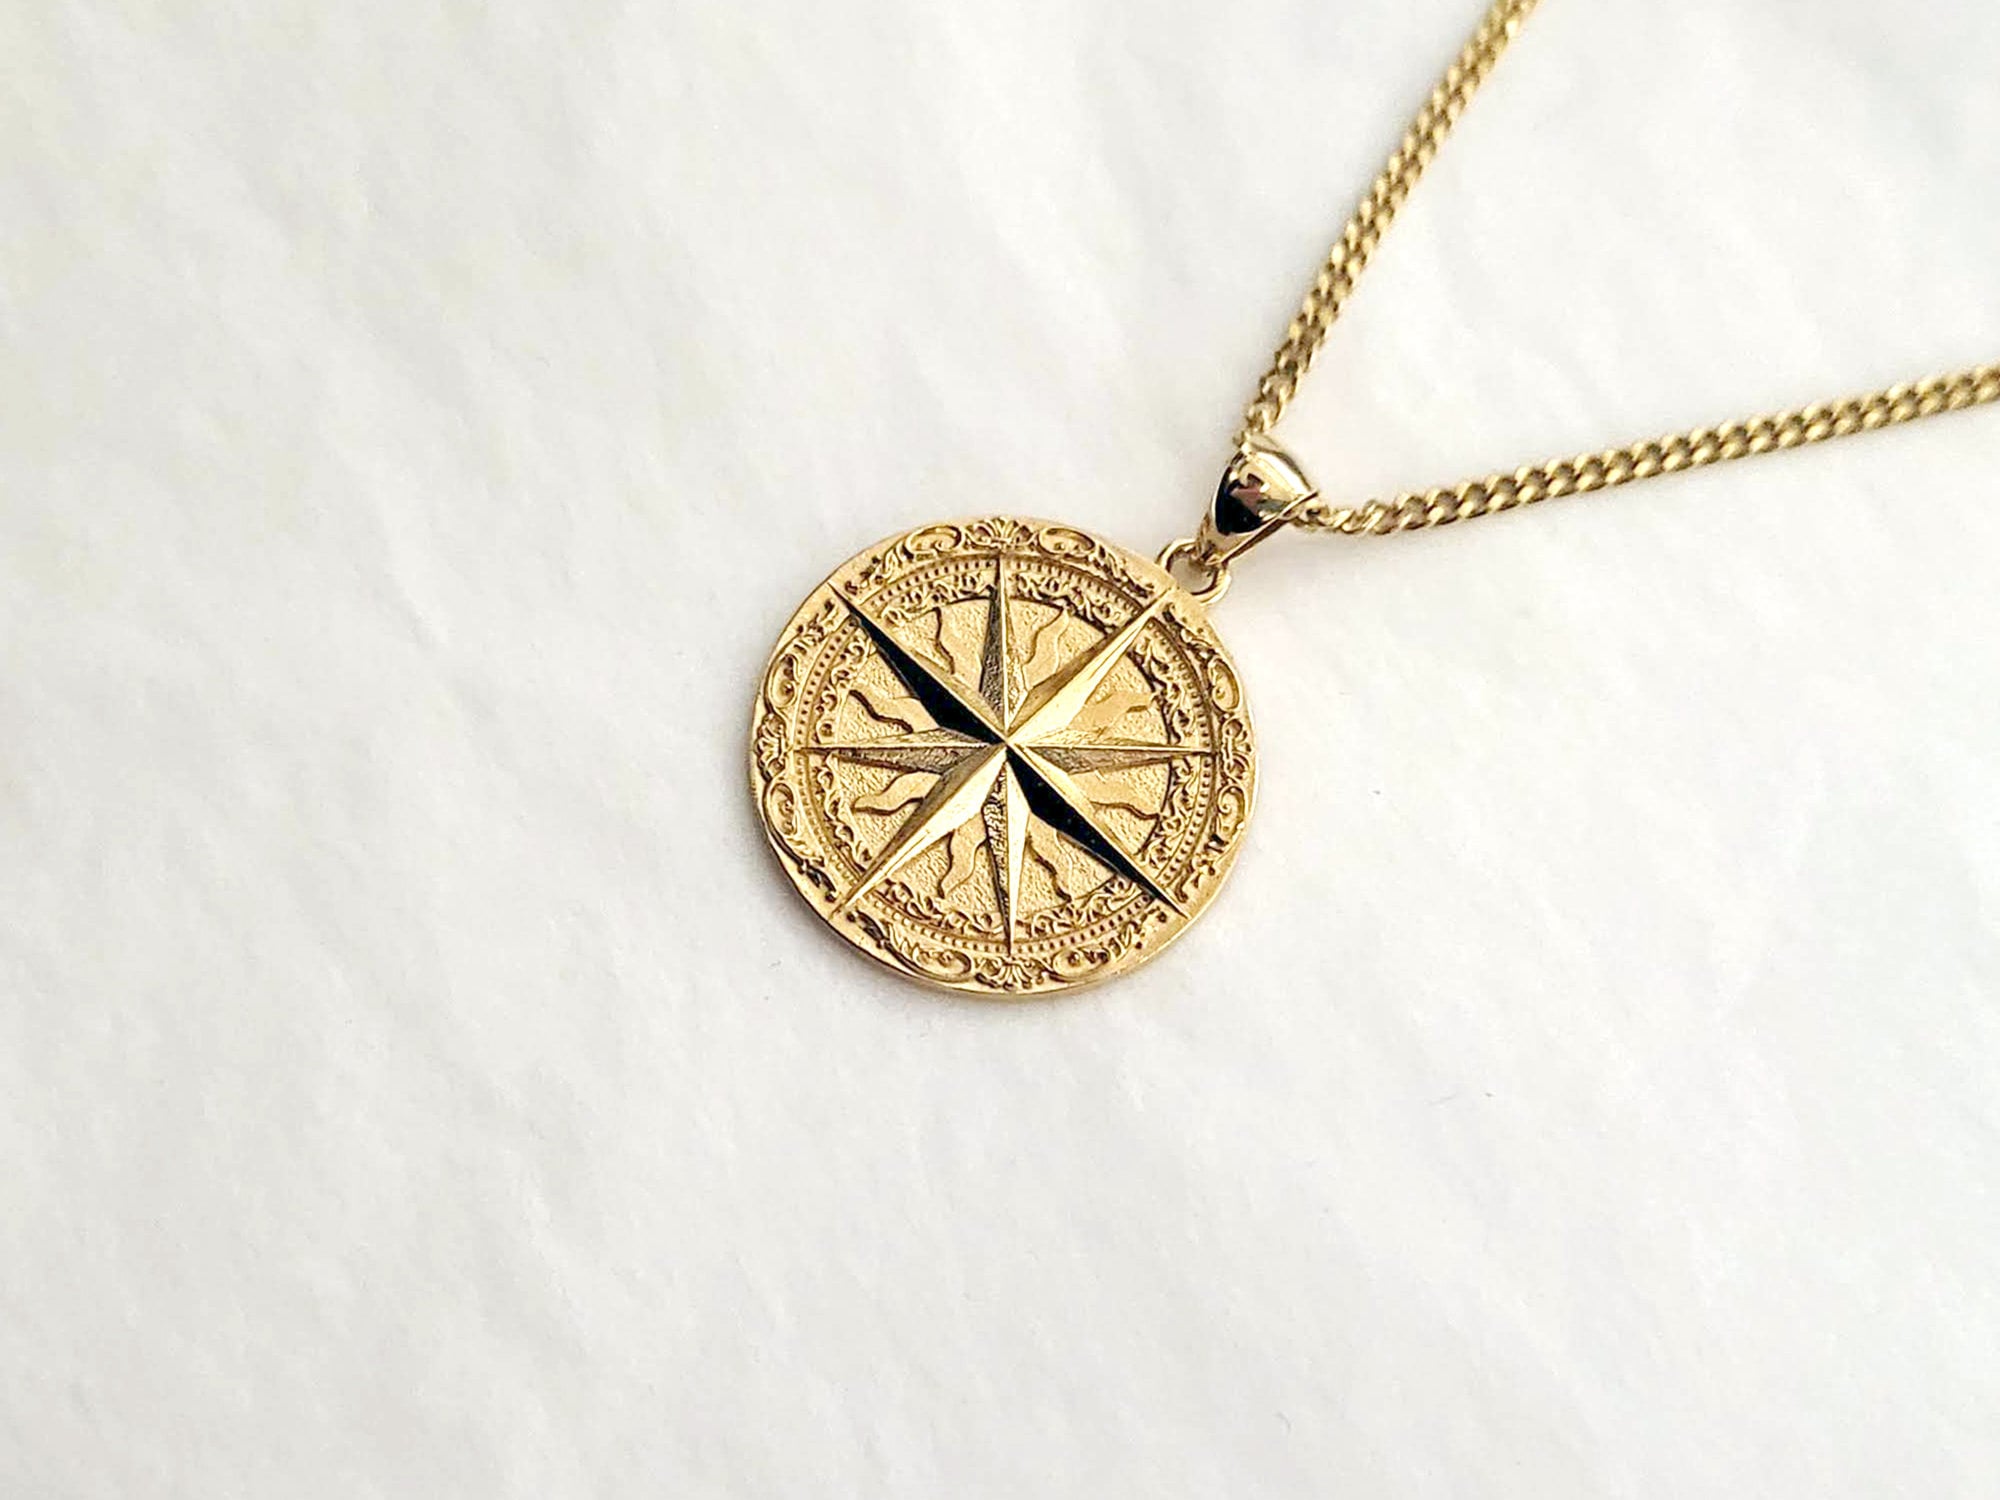 14k Yellow Gold Compass Pendant Charm Necklace Seashore Boating Fine Jewelry  For Women Gifts For Her - Walmart.com